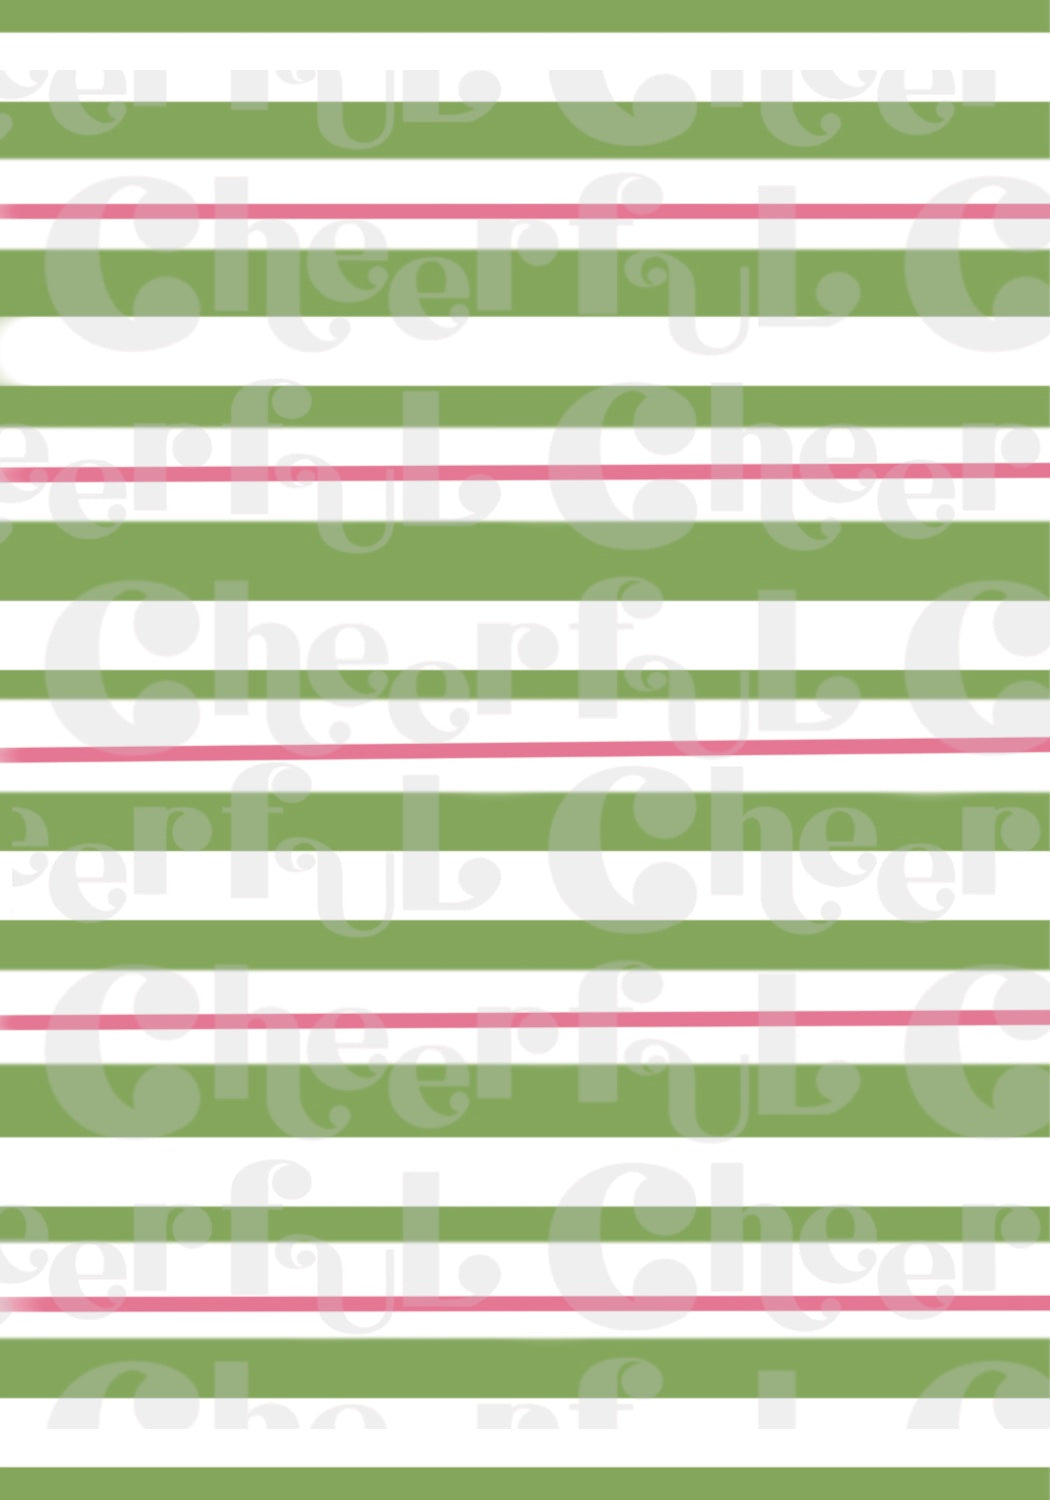 striped cookie backer card for packaging  - file download